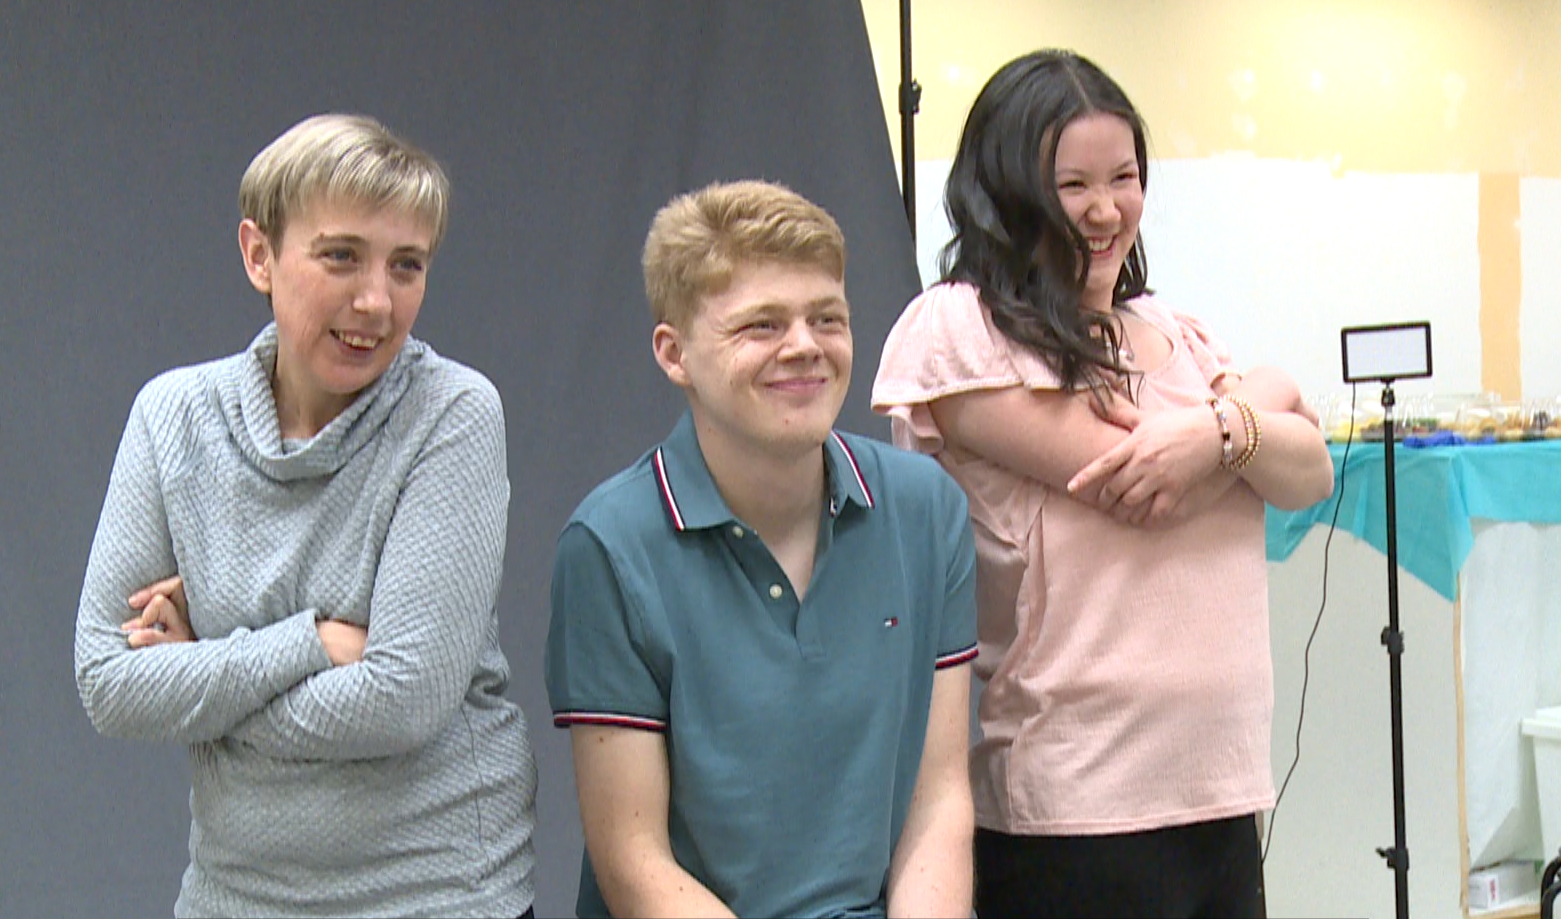 Fashion photoshoot empowers adults with disabilities in Memramcook, N.B.